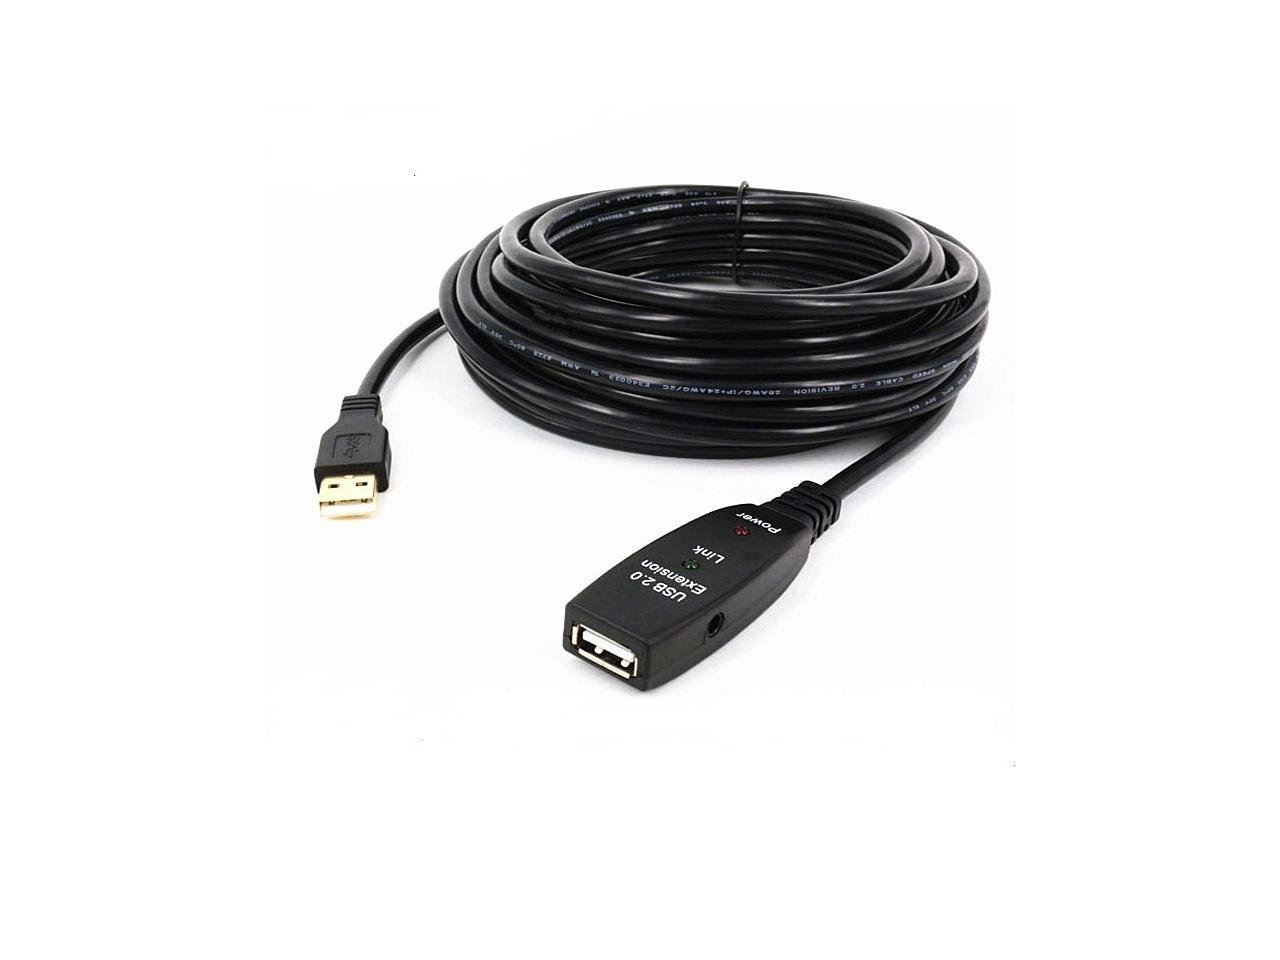 Cable Length: Other ShineBear 2017 Newest Arrival 5 Meters USB 2.0 Male to Female Cable Active Repeater USB Extension Extender Cable Adapter